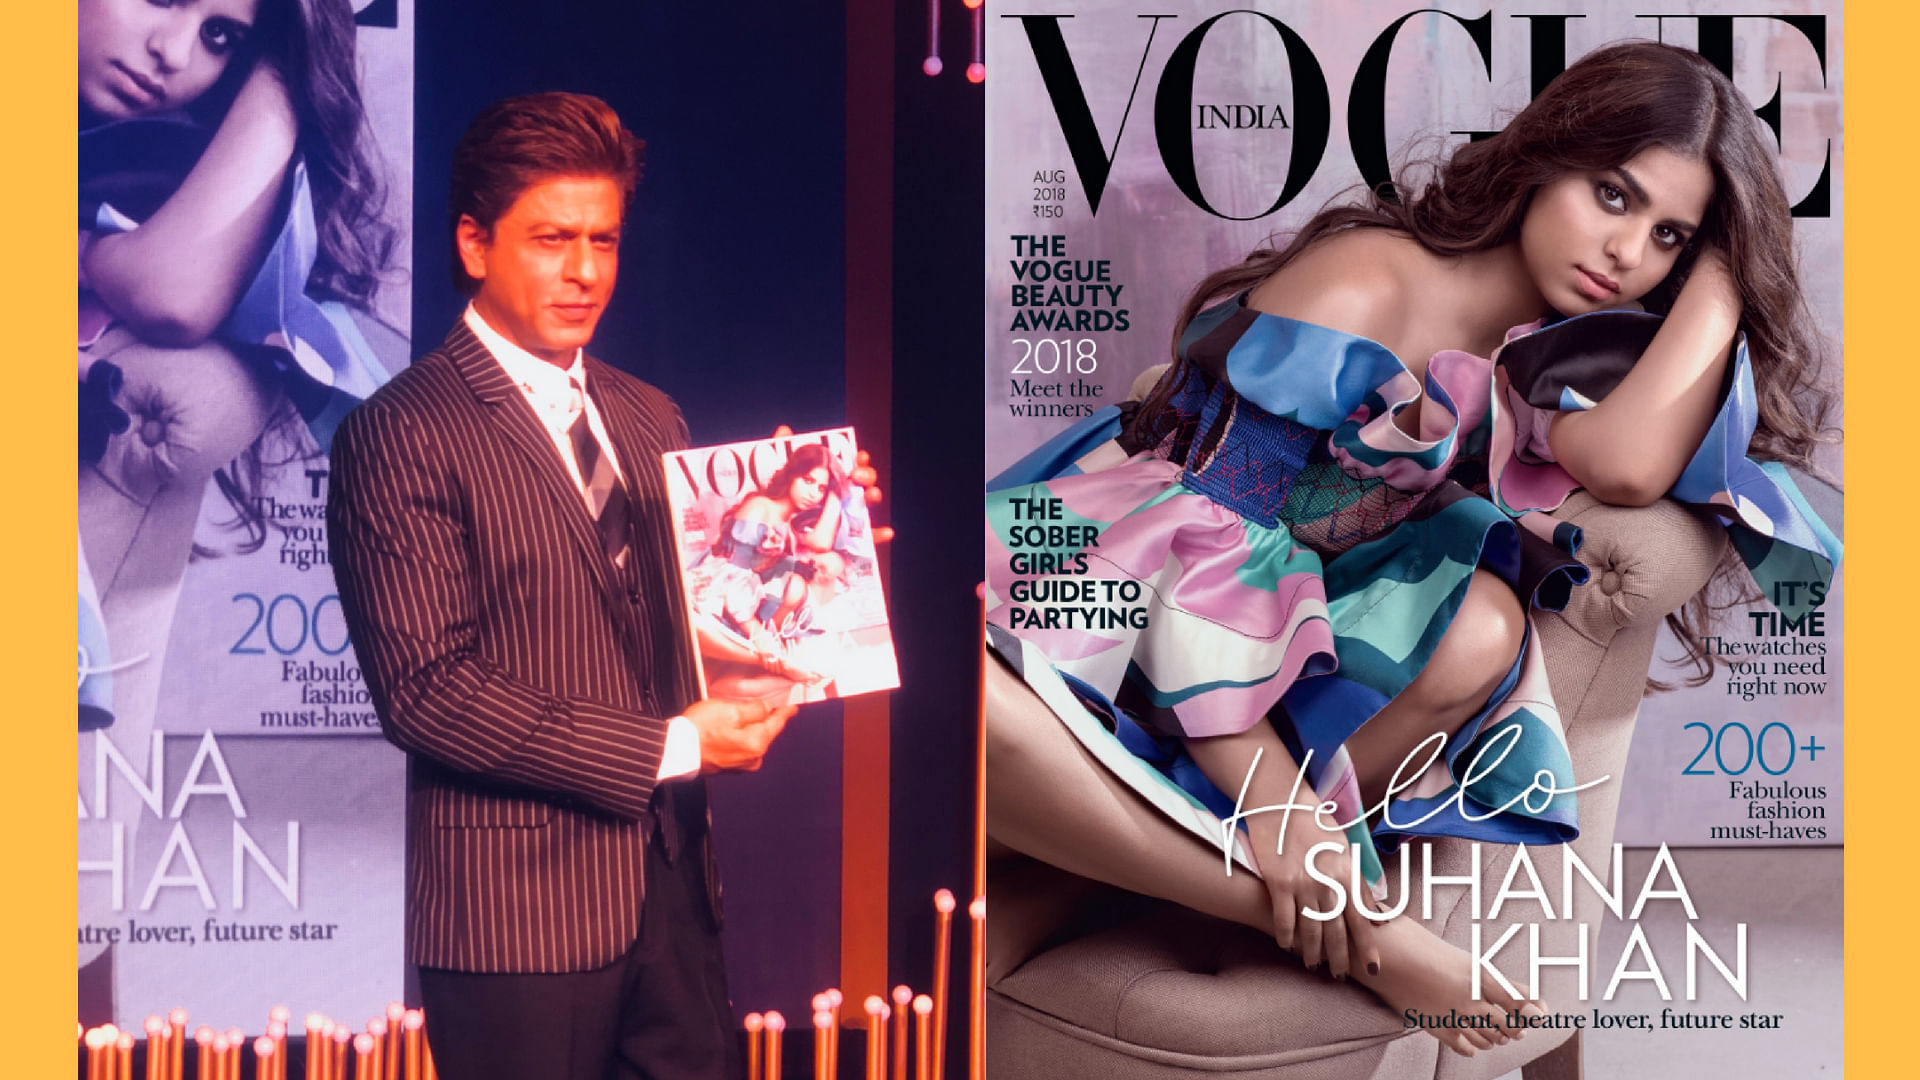 Shah Rukh Khan launches his daughter Suhana’s first cover photo feature on a fashion magazine.